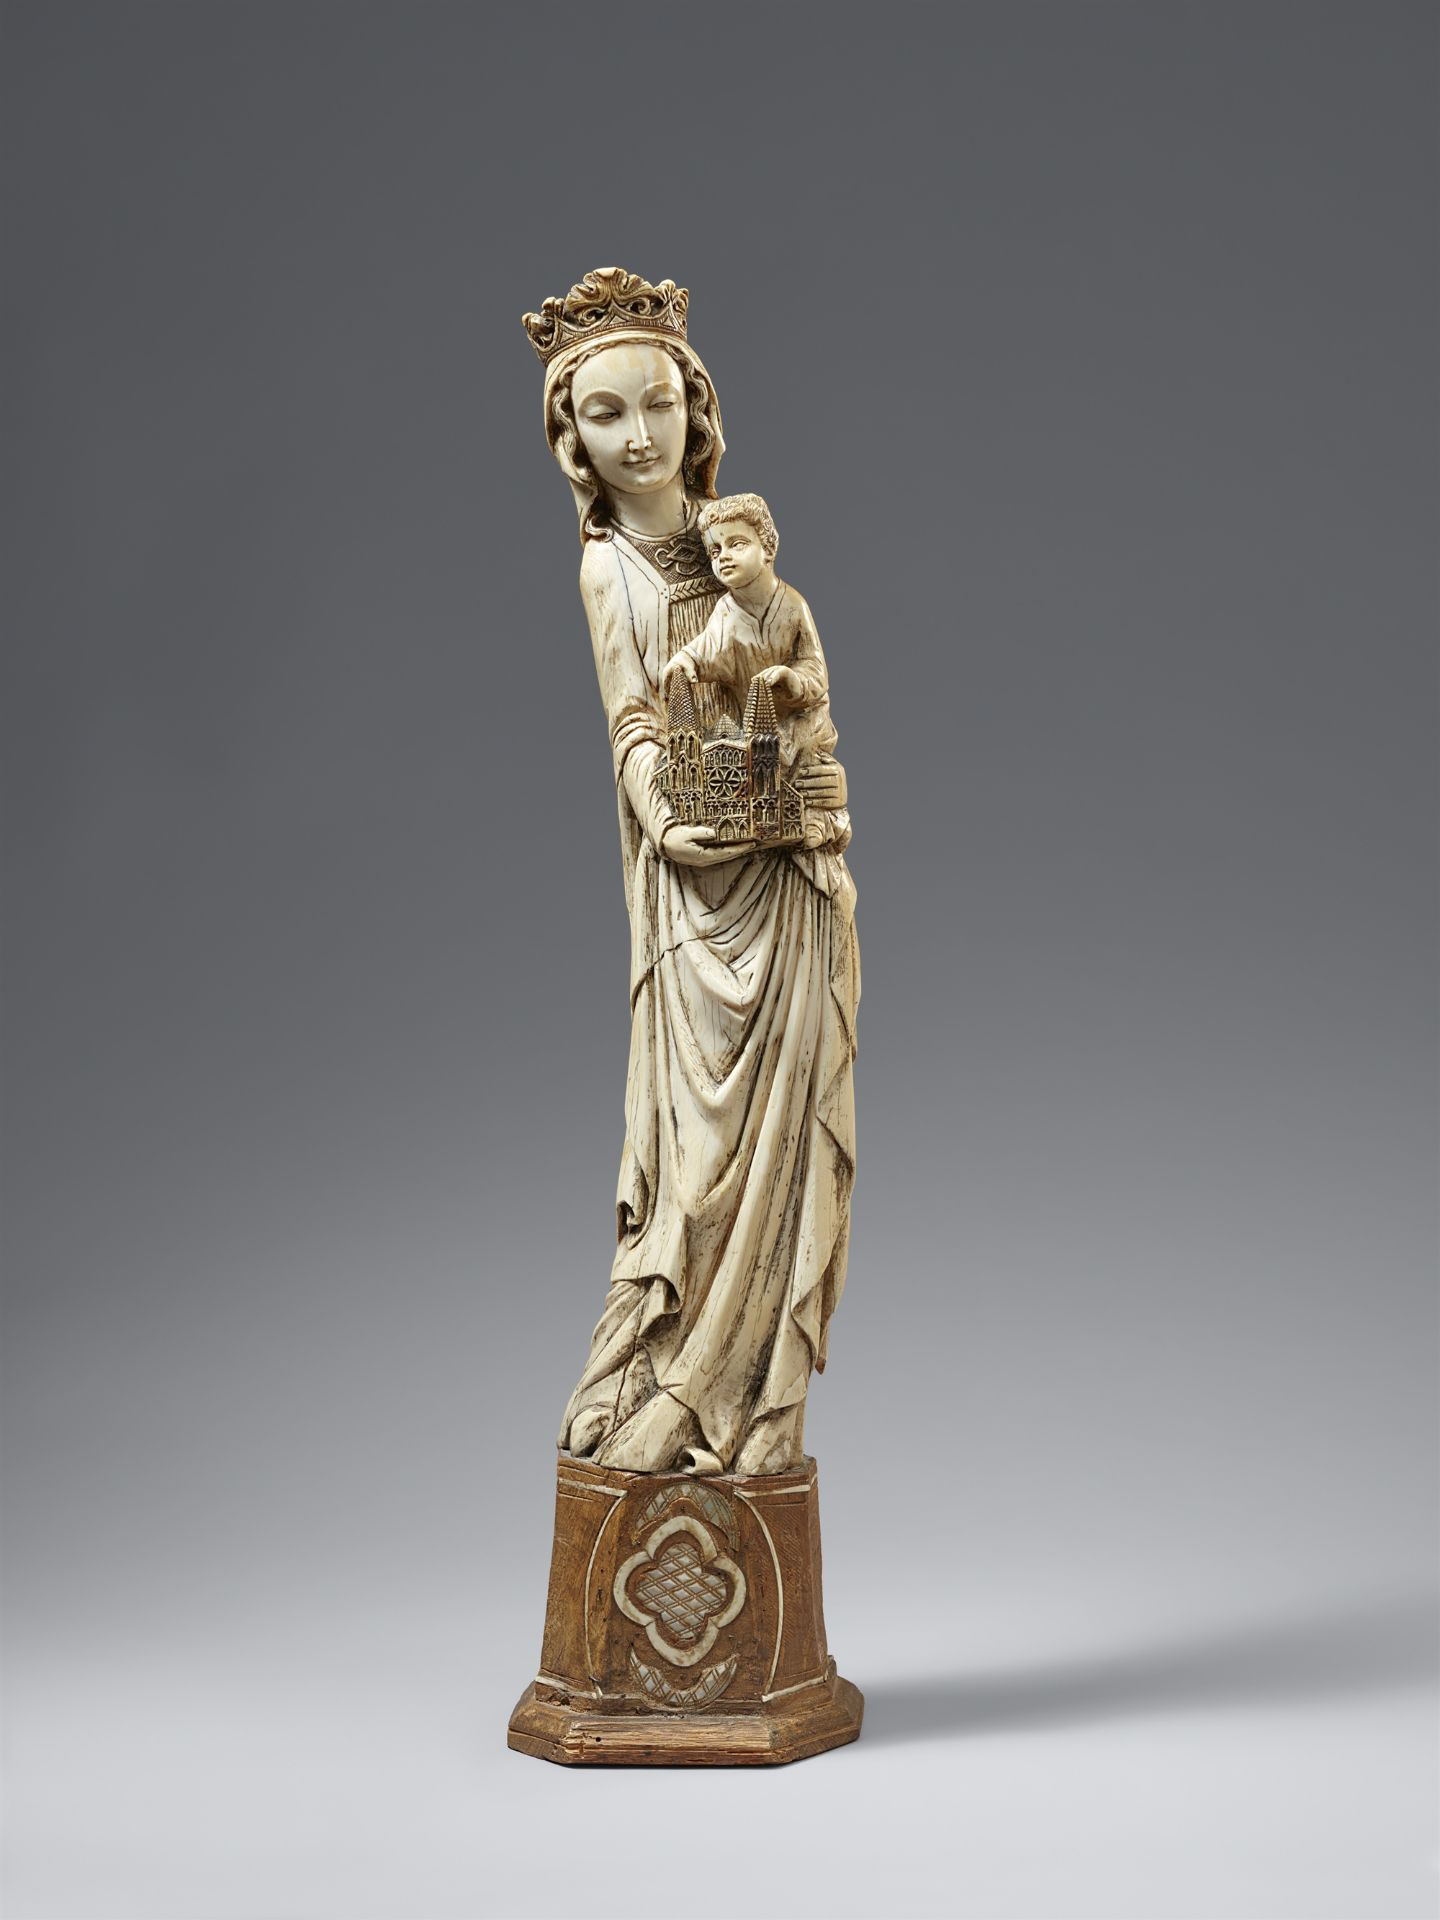 A possibly Indo-Portuguese Virgin Mary with the Christ Child. Around 1900